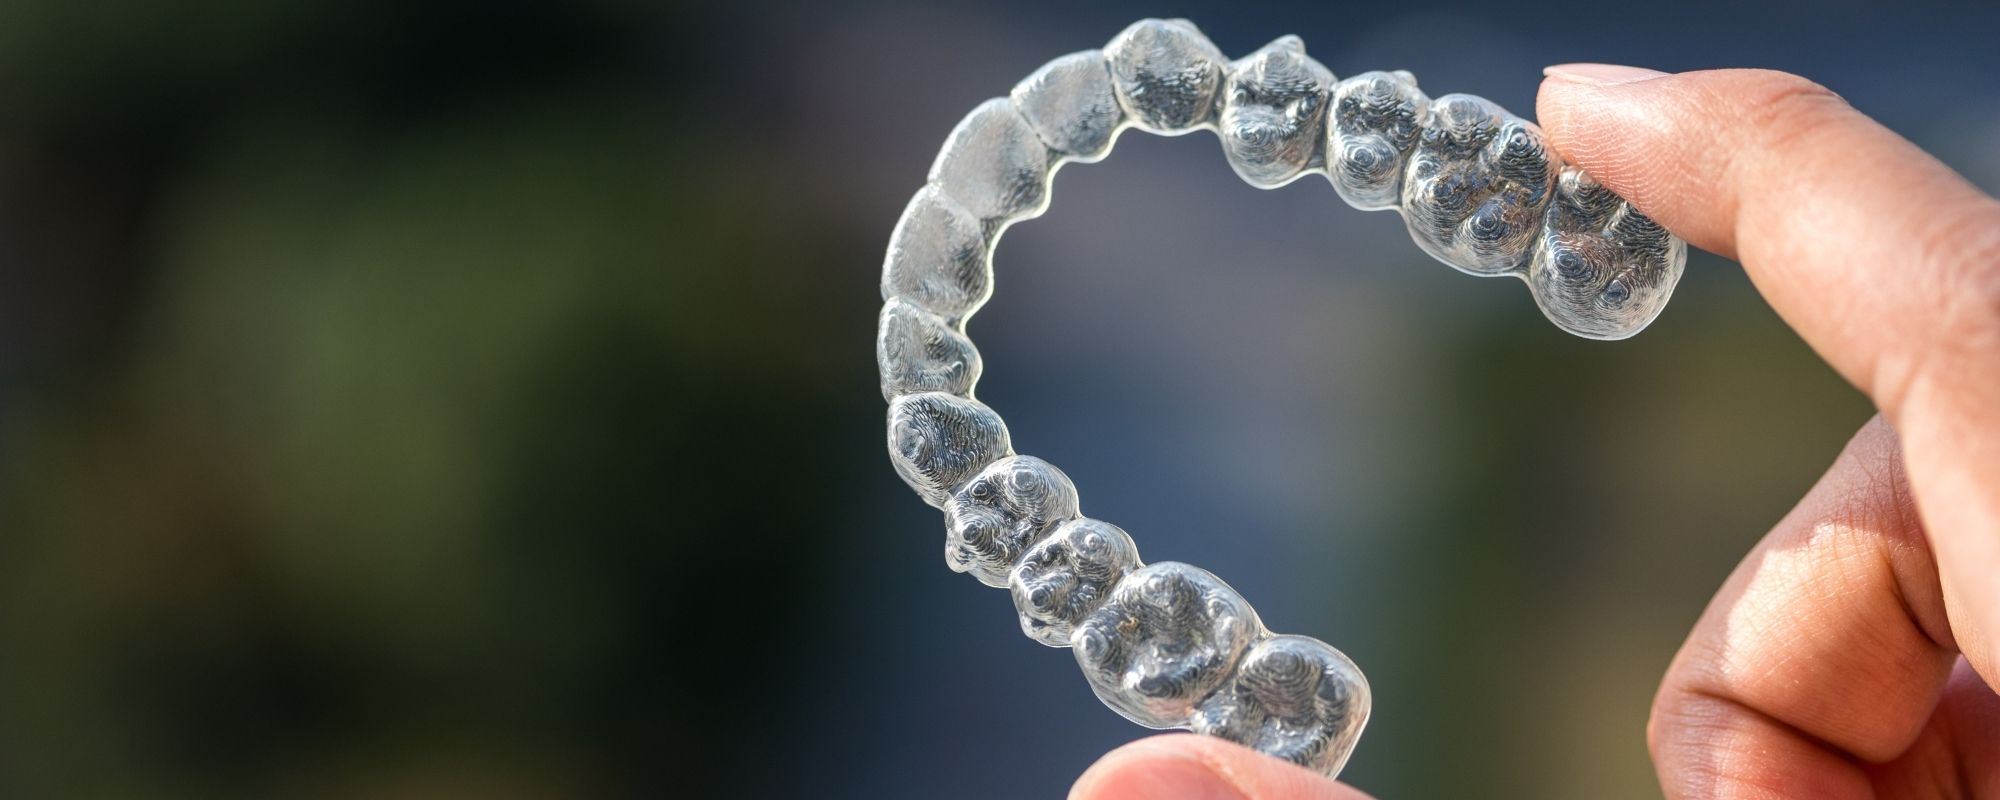 Invisalign clear aligners straighten teeth discreetly using invisible trays